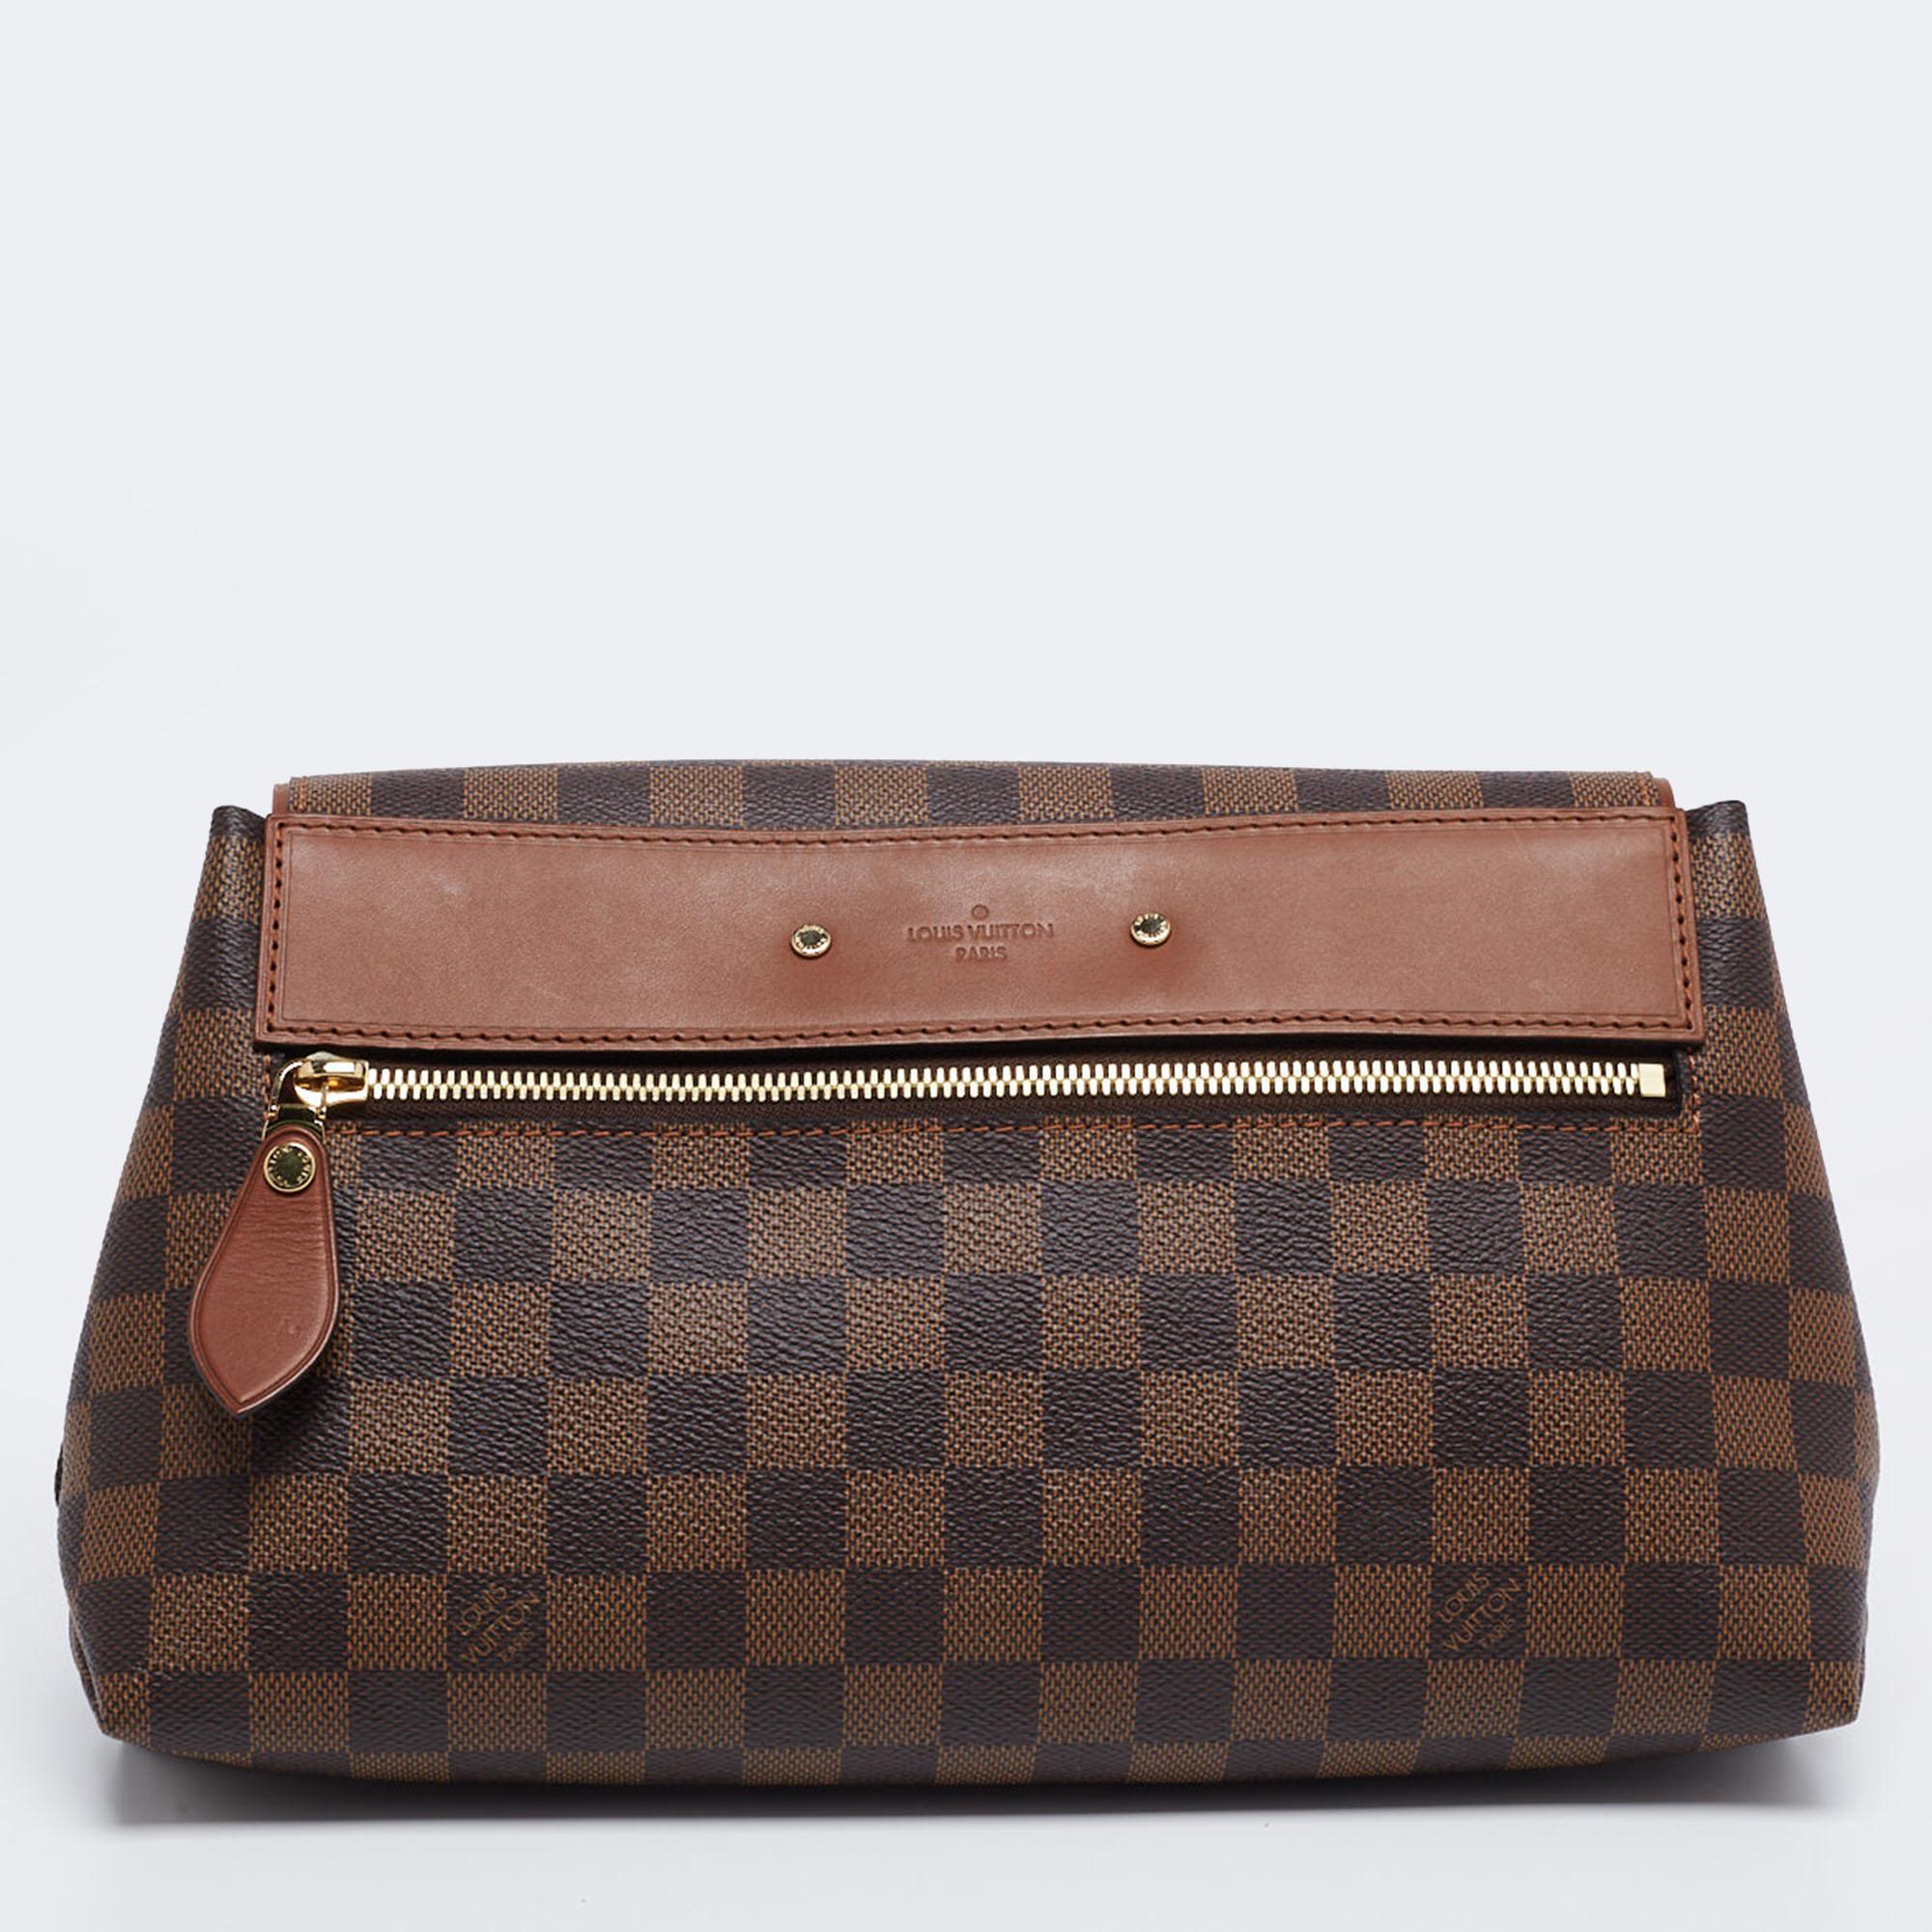 The house of Louis Vuitton brings you the perfect everyday clutch! Crafted skillfully from coated canvas, the brown piece is adorned with gold-tone details and has a front flap that opens into a well-sized interior. It is finished with a zip pocket